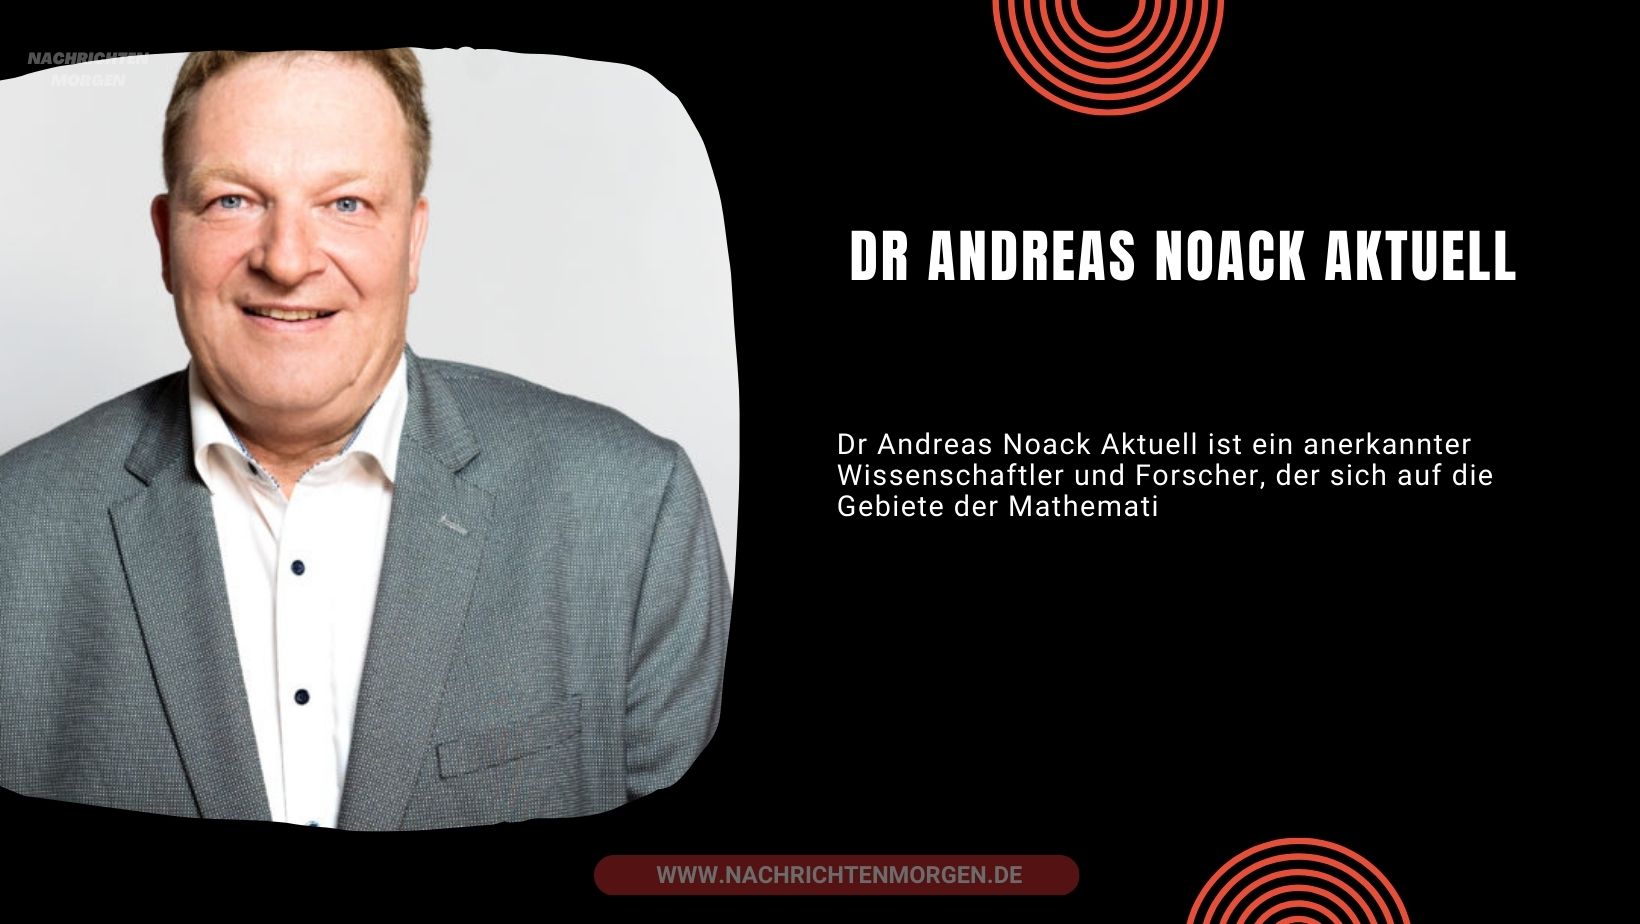 dr andreas noack aktuell